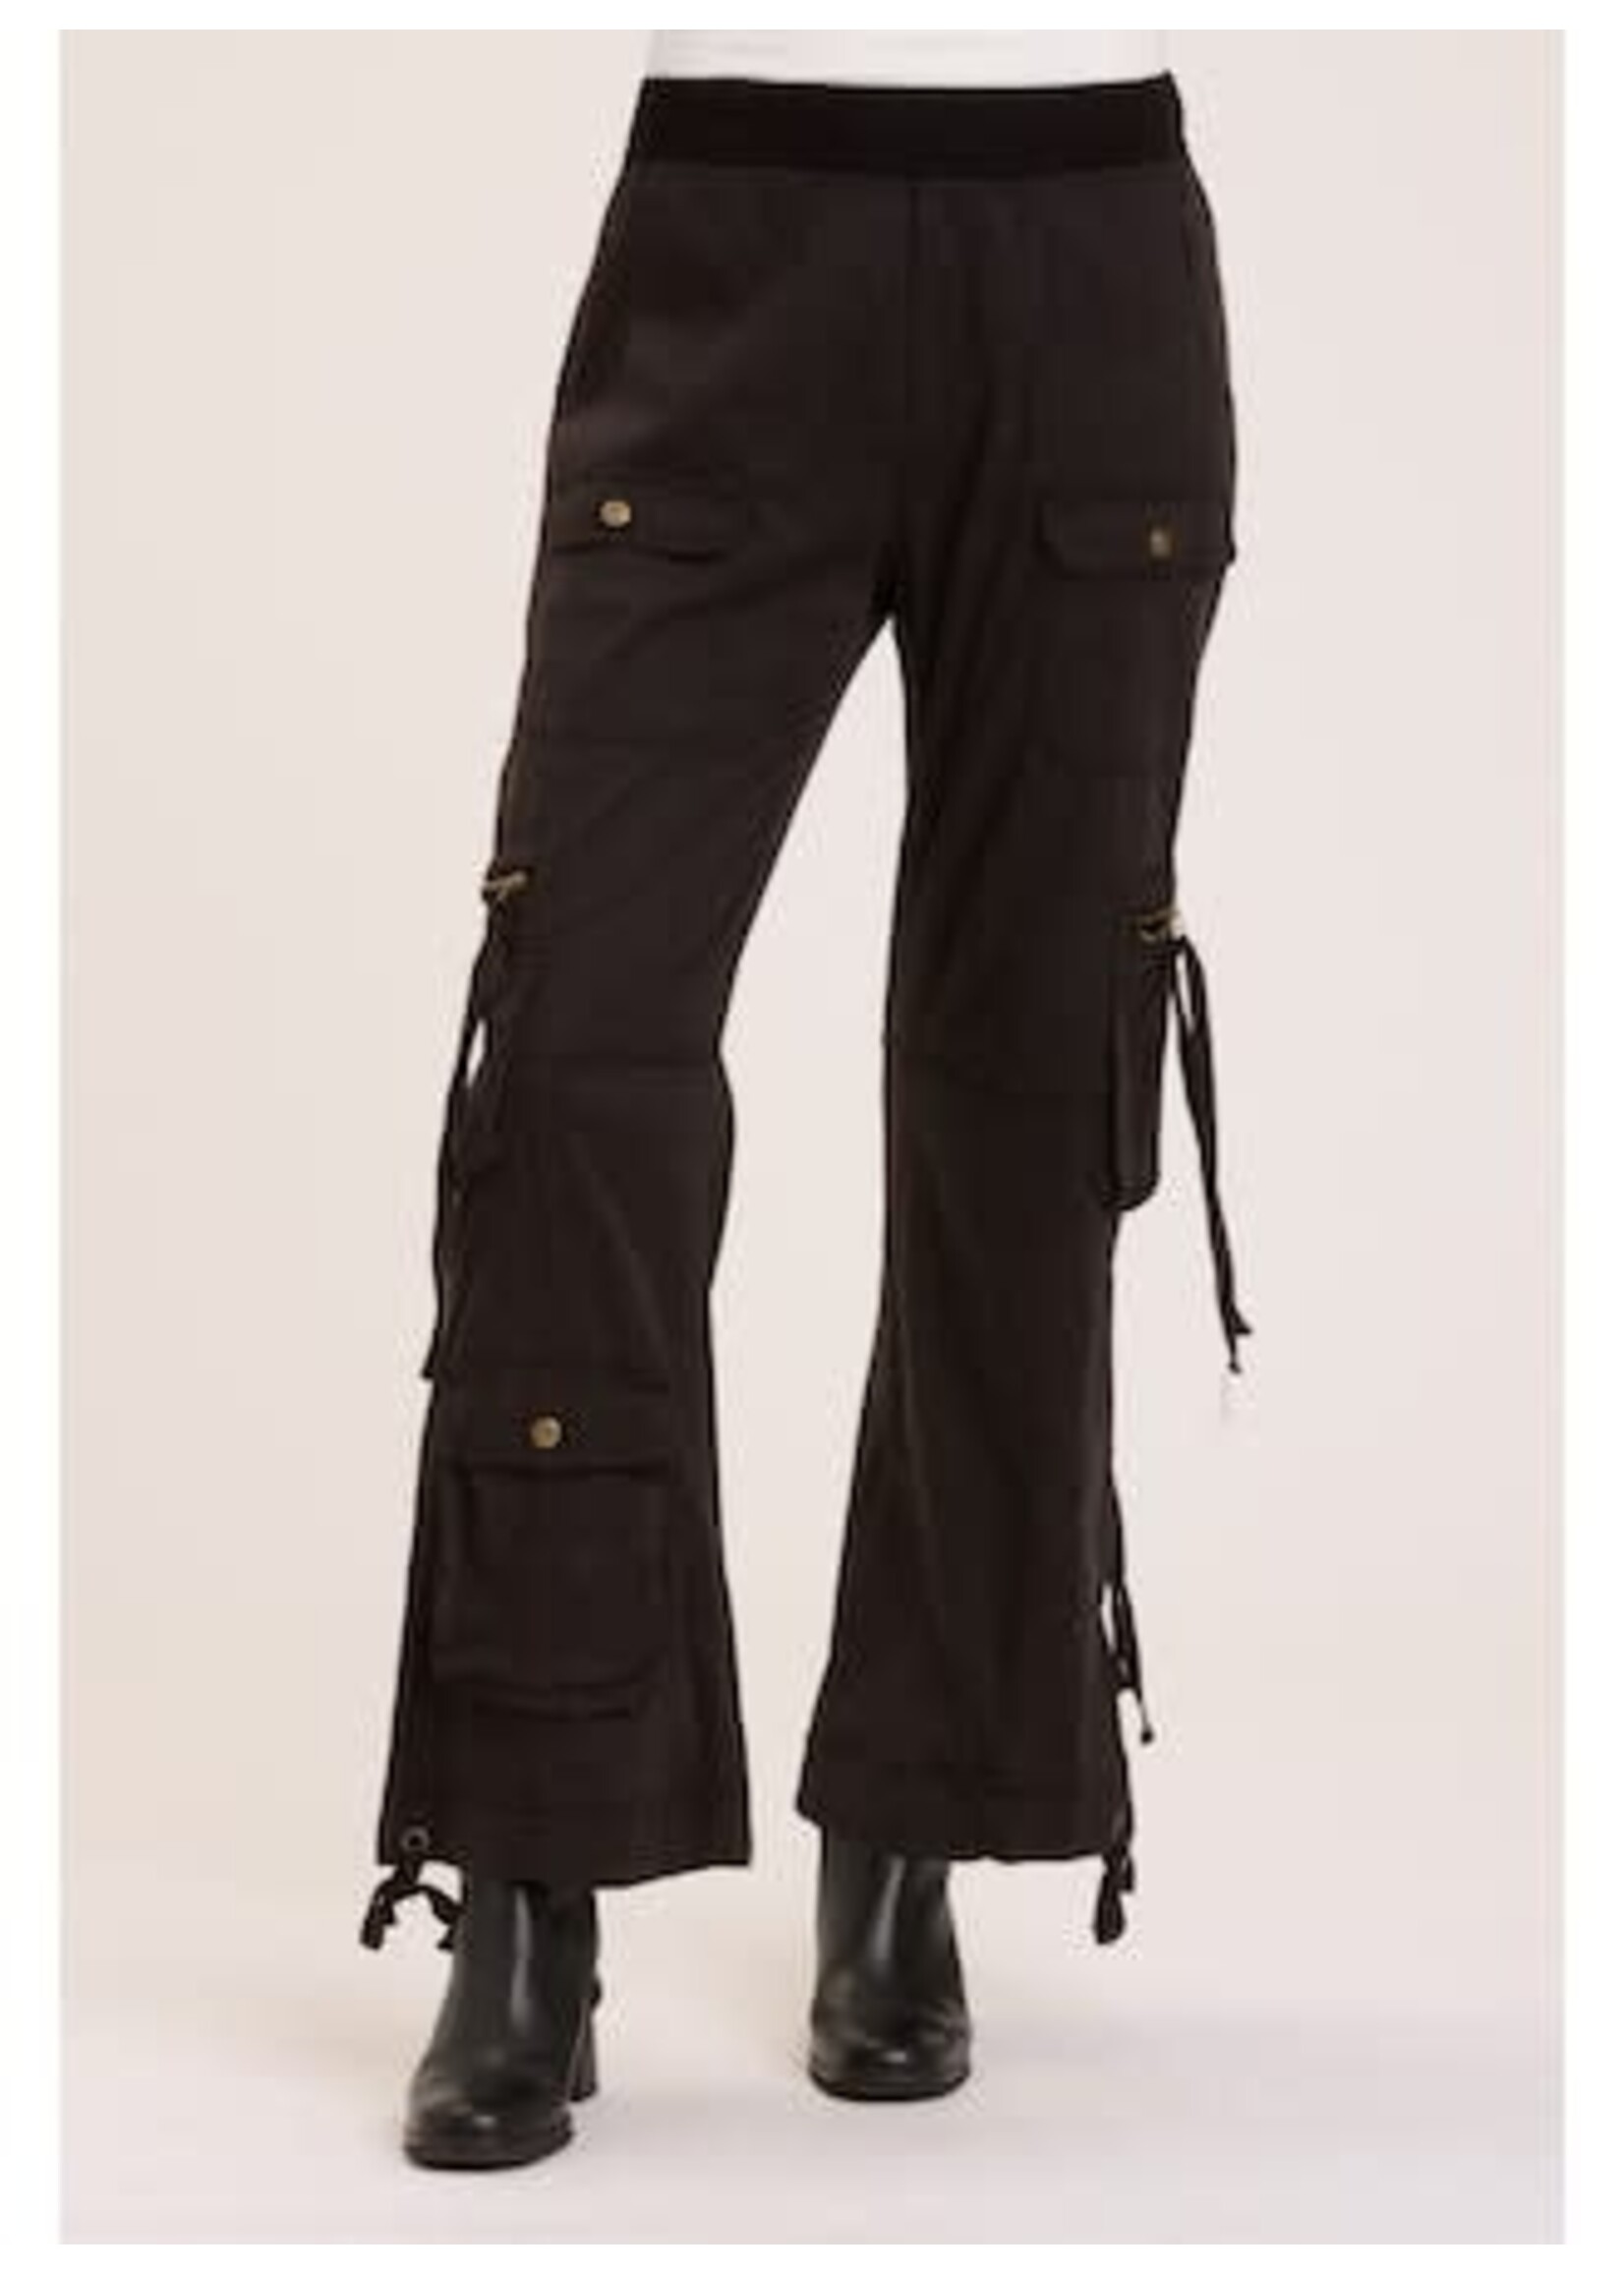 CHAUCER CARGO PANT